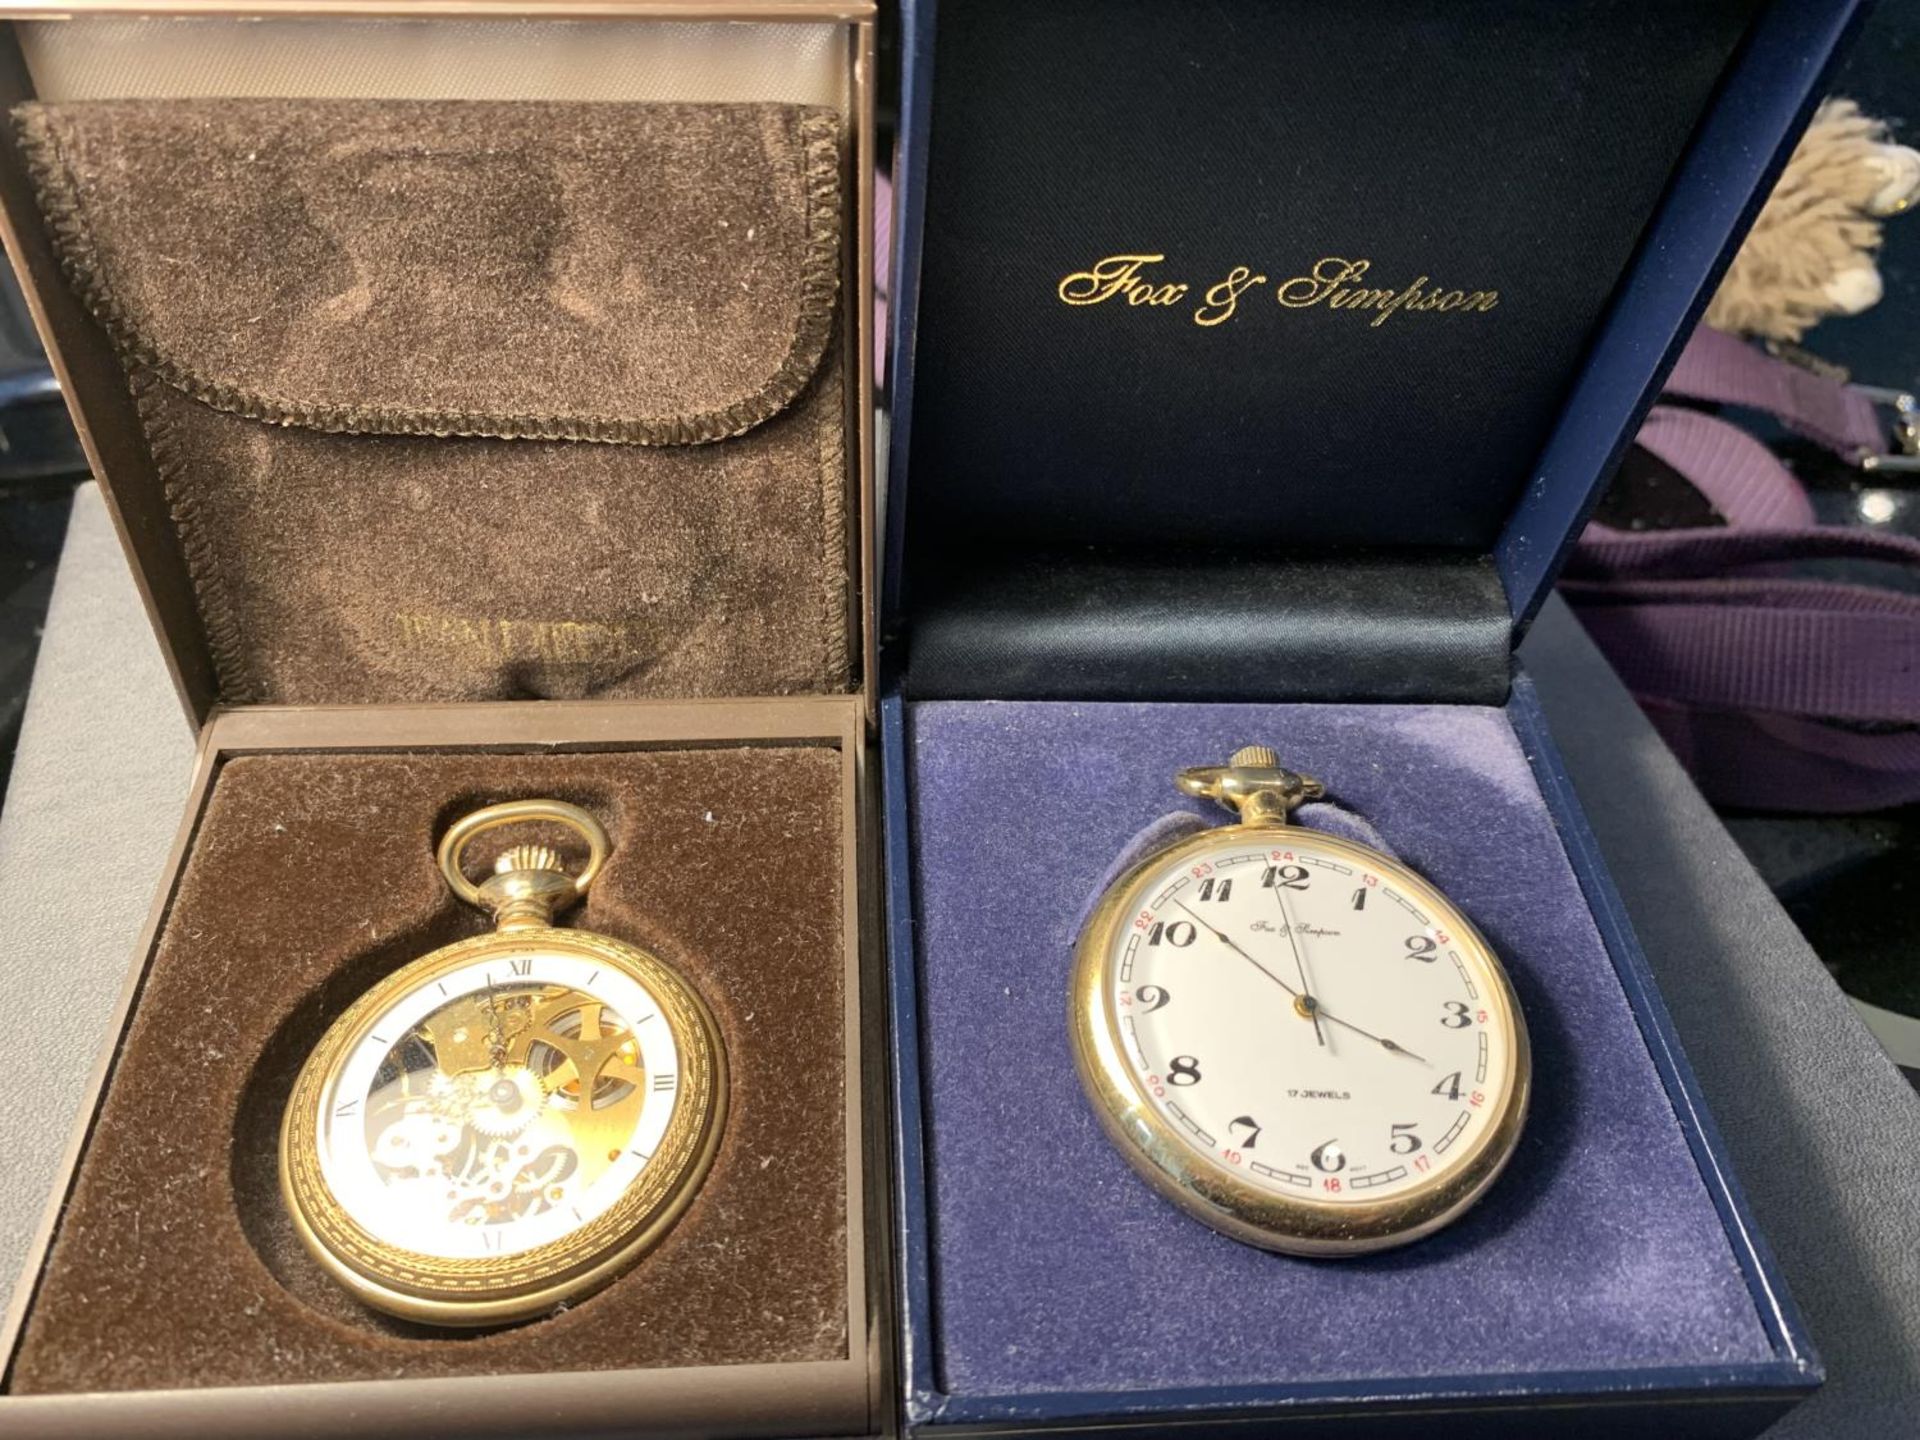 TWO POCKET WATCHES ONE FOX AND SIMPSON AND ONE JEAN PIERRE IN PRESENTATION BOXES SEEN WORKING BUT NO